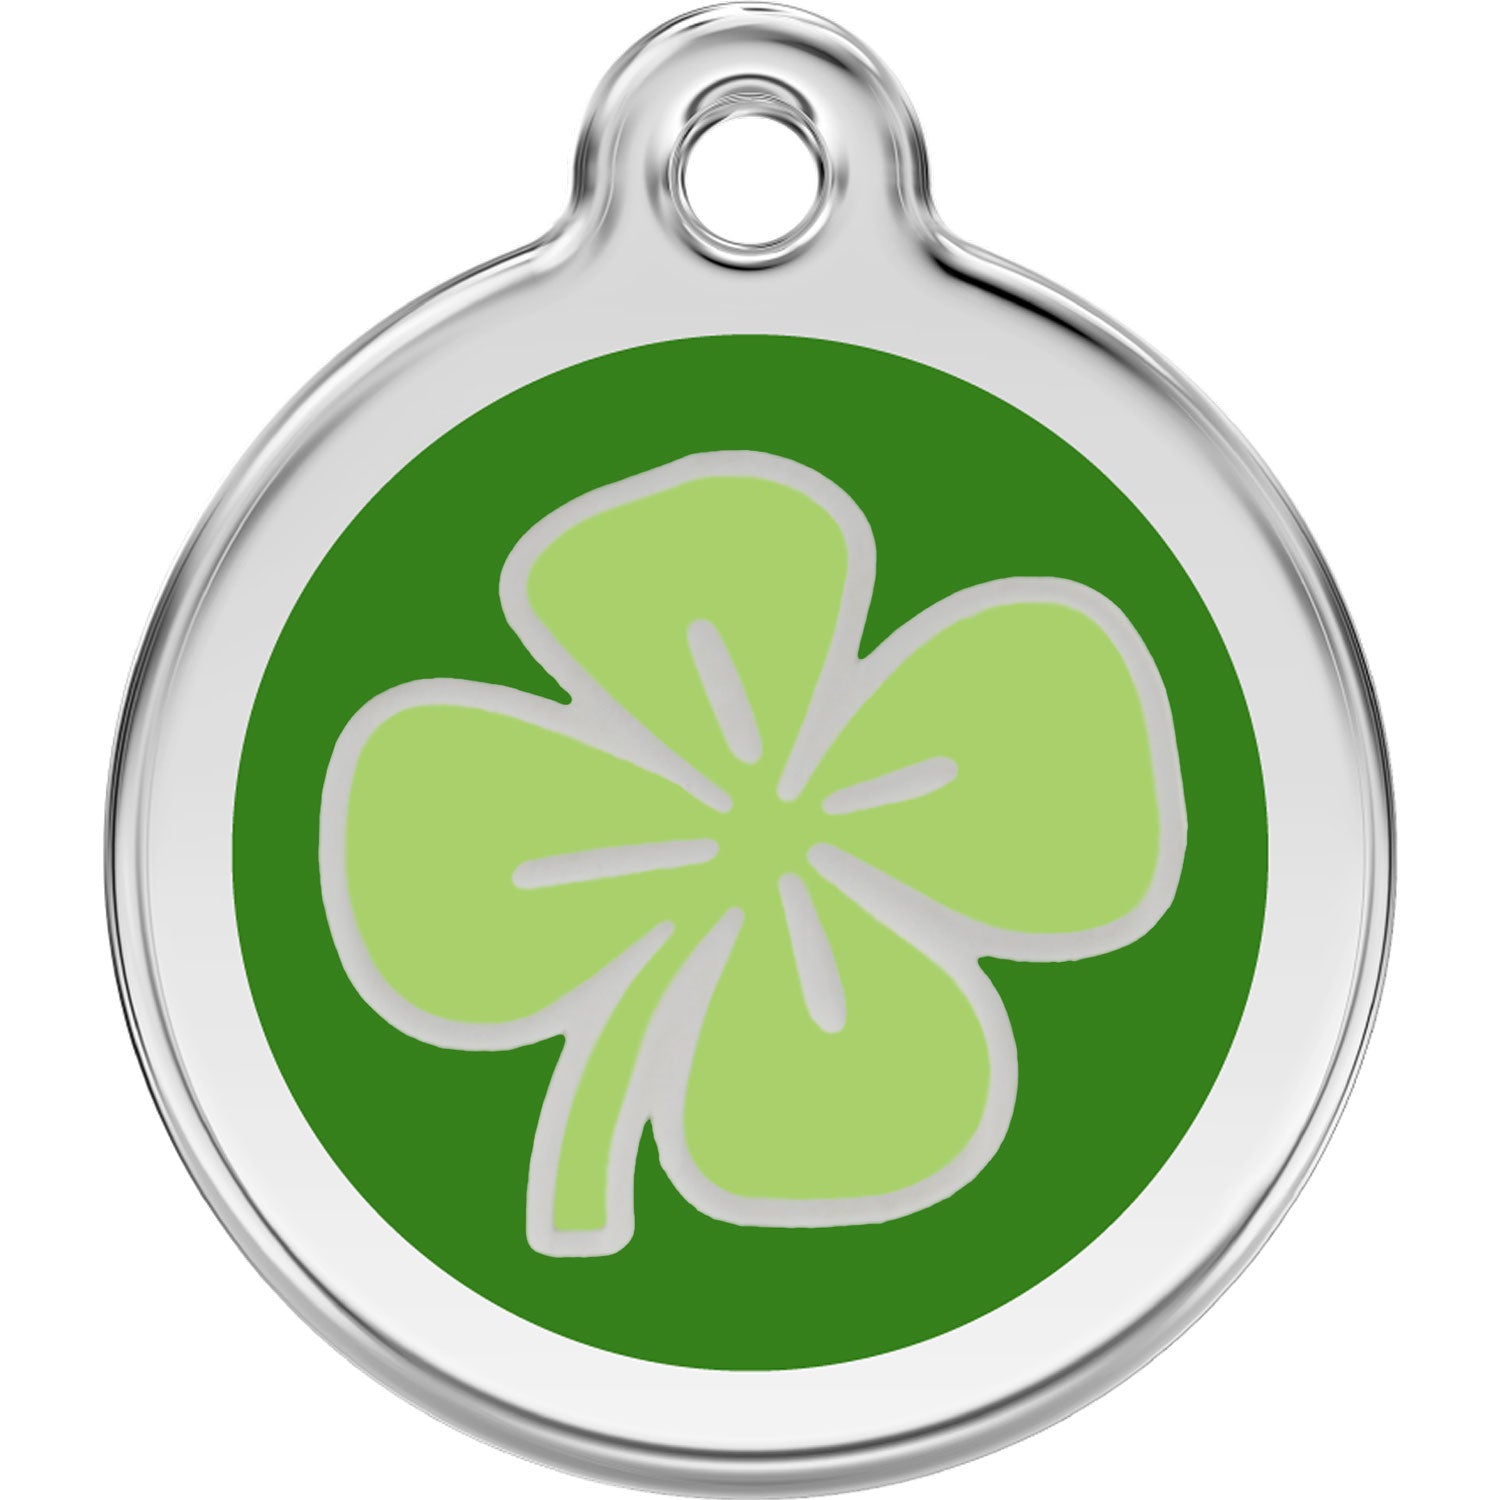 Dingo Clover Pet Tags in Stainless Steel with Enamel DogTuff